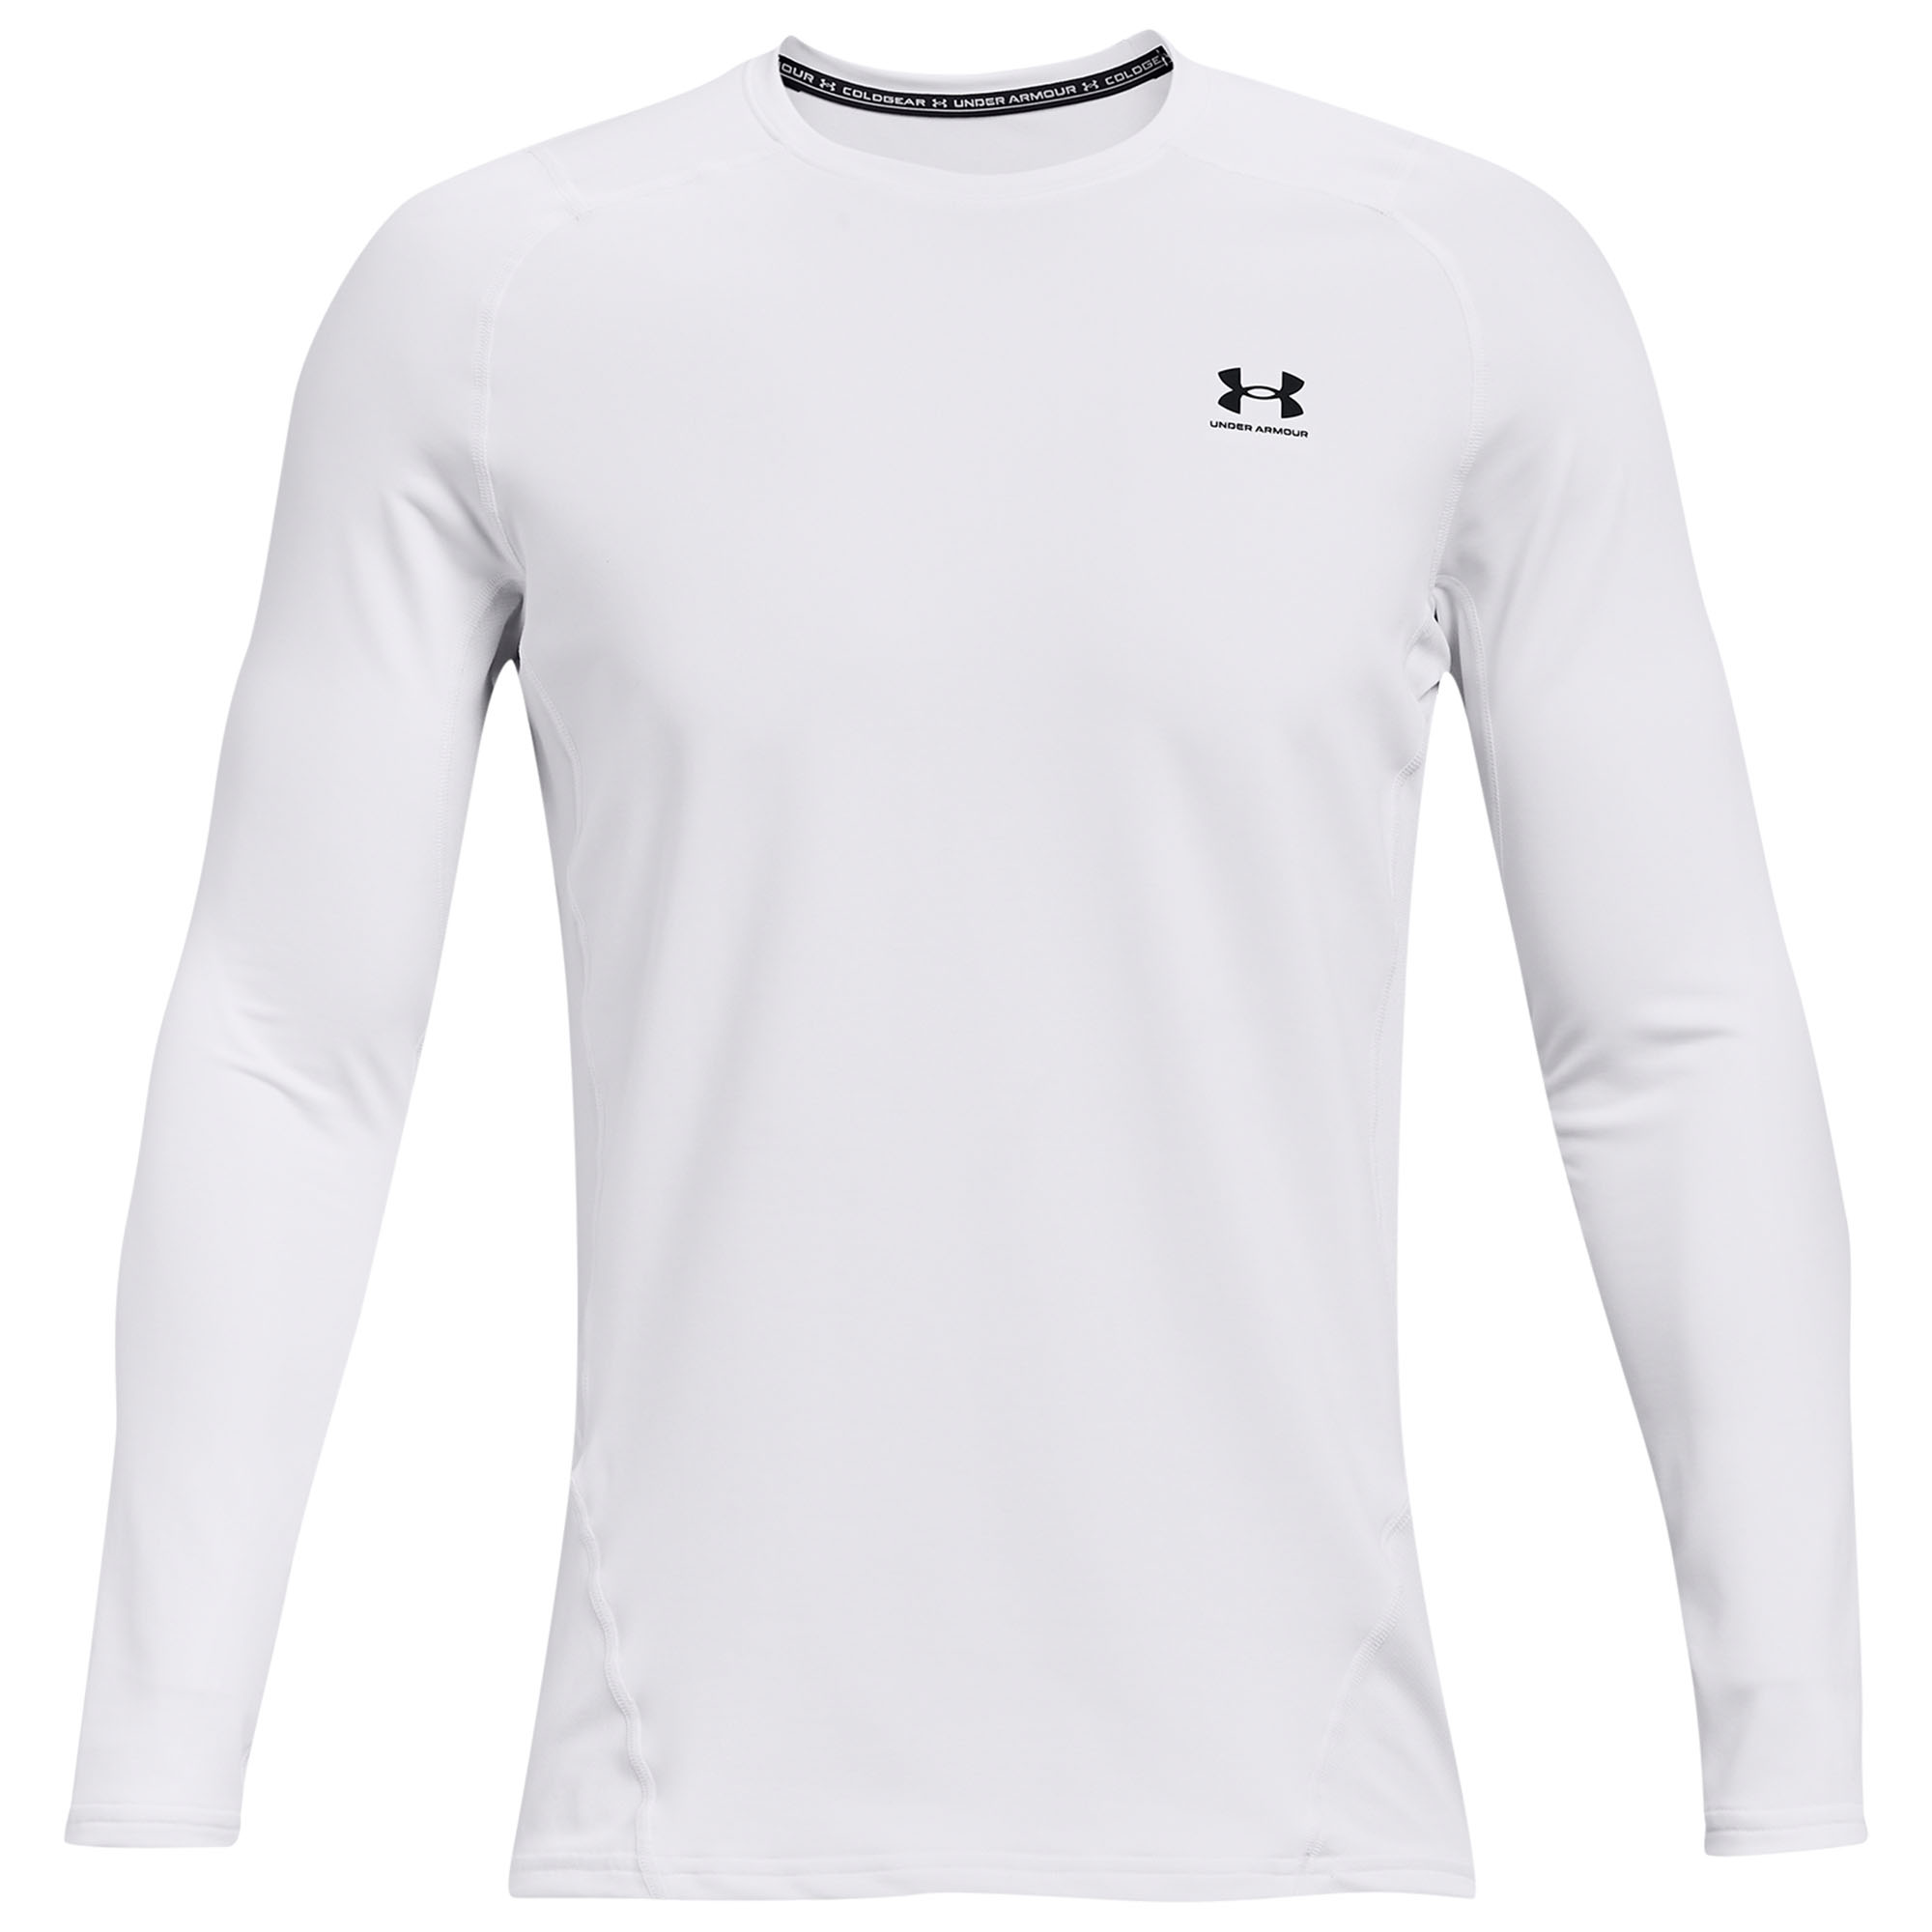 Under Armour Men's ColdGear Fitted Crew Shirt